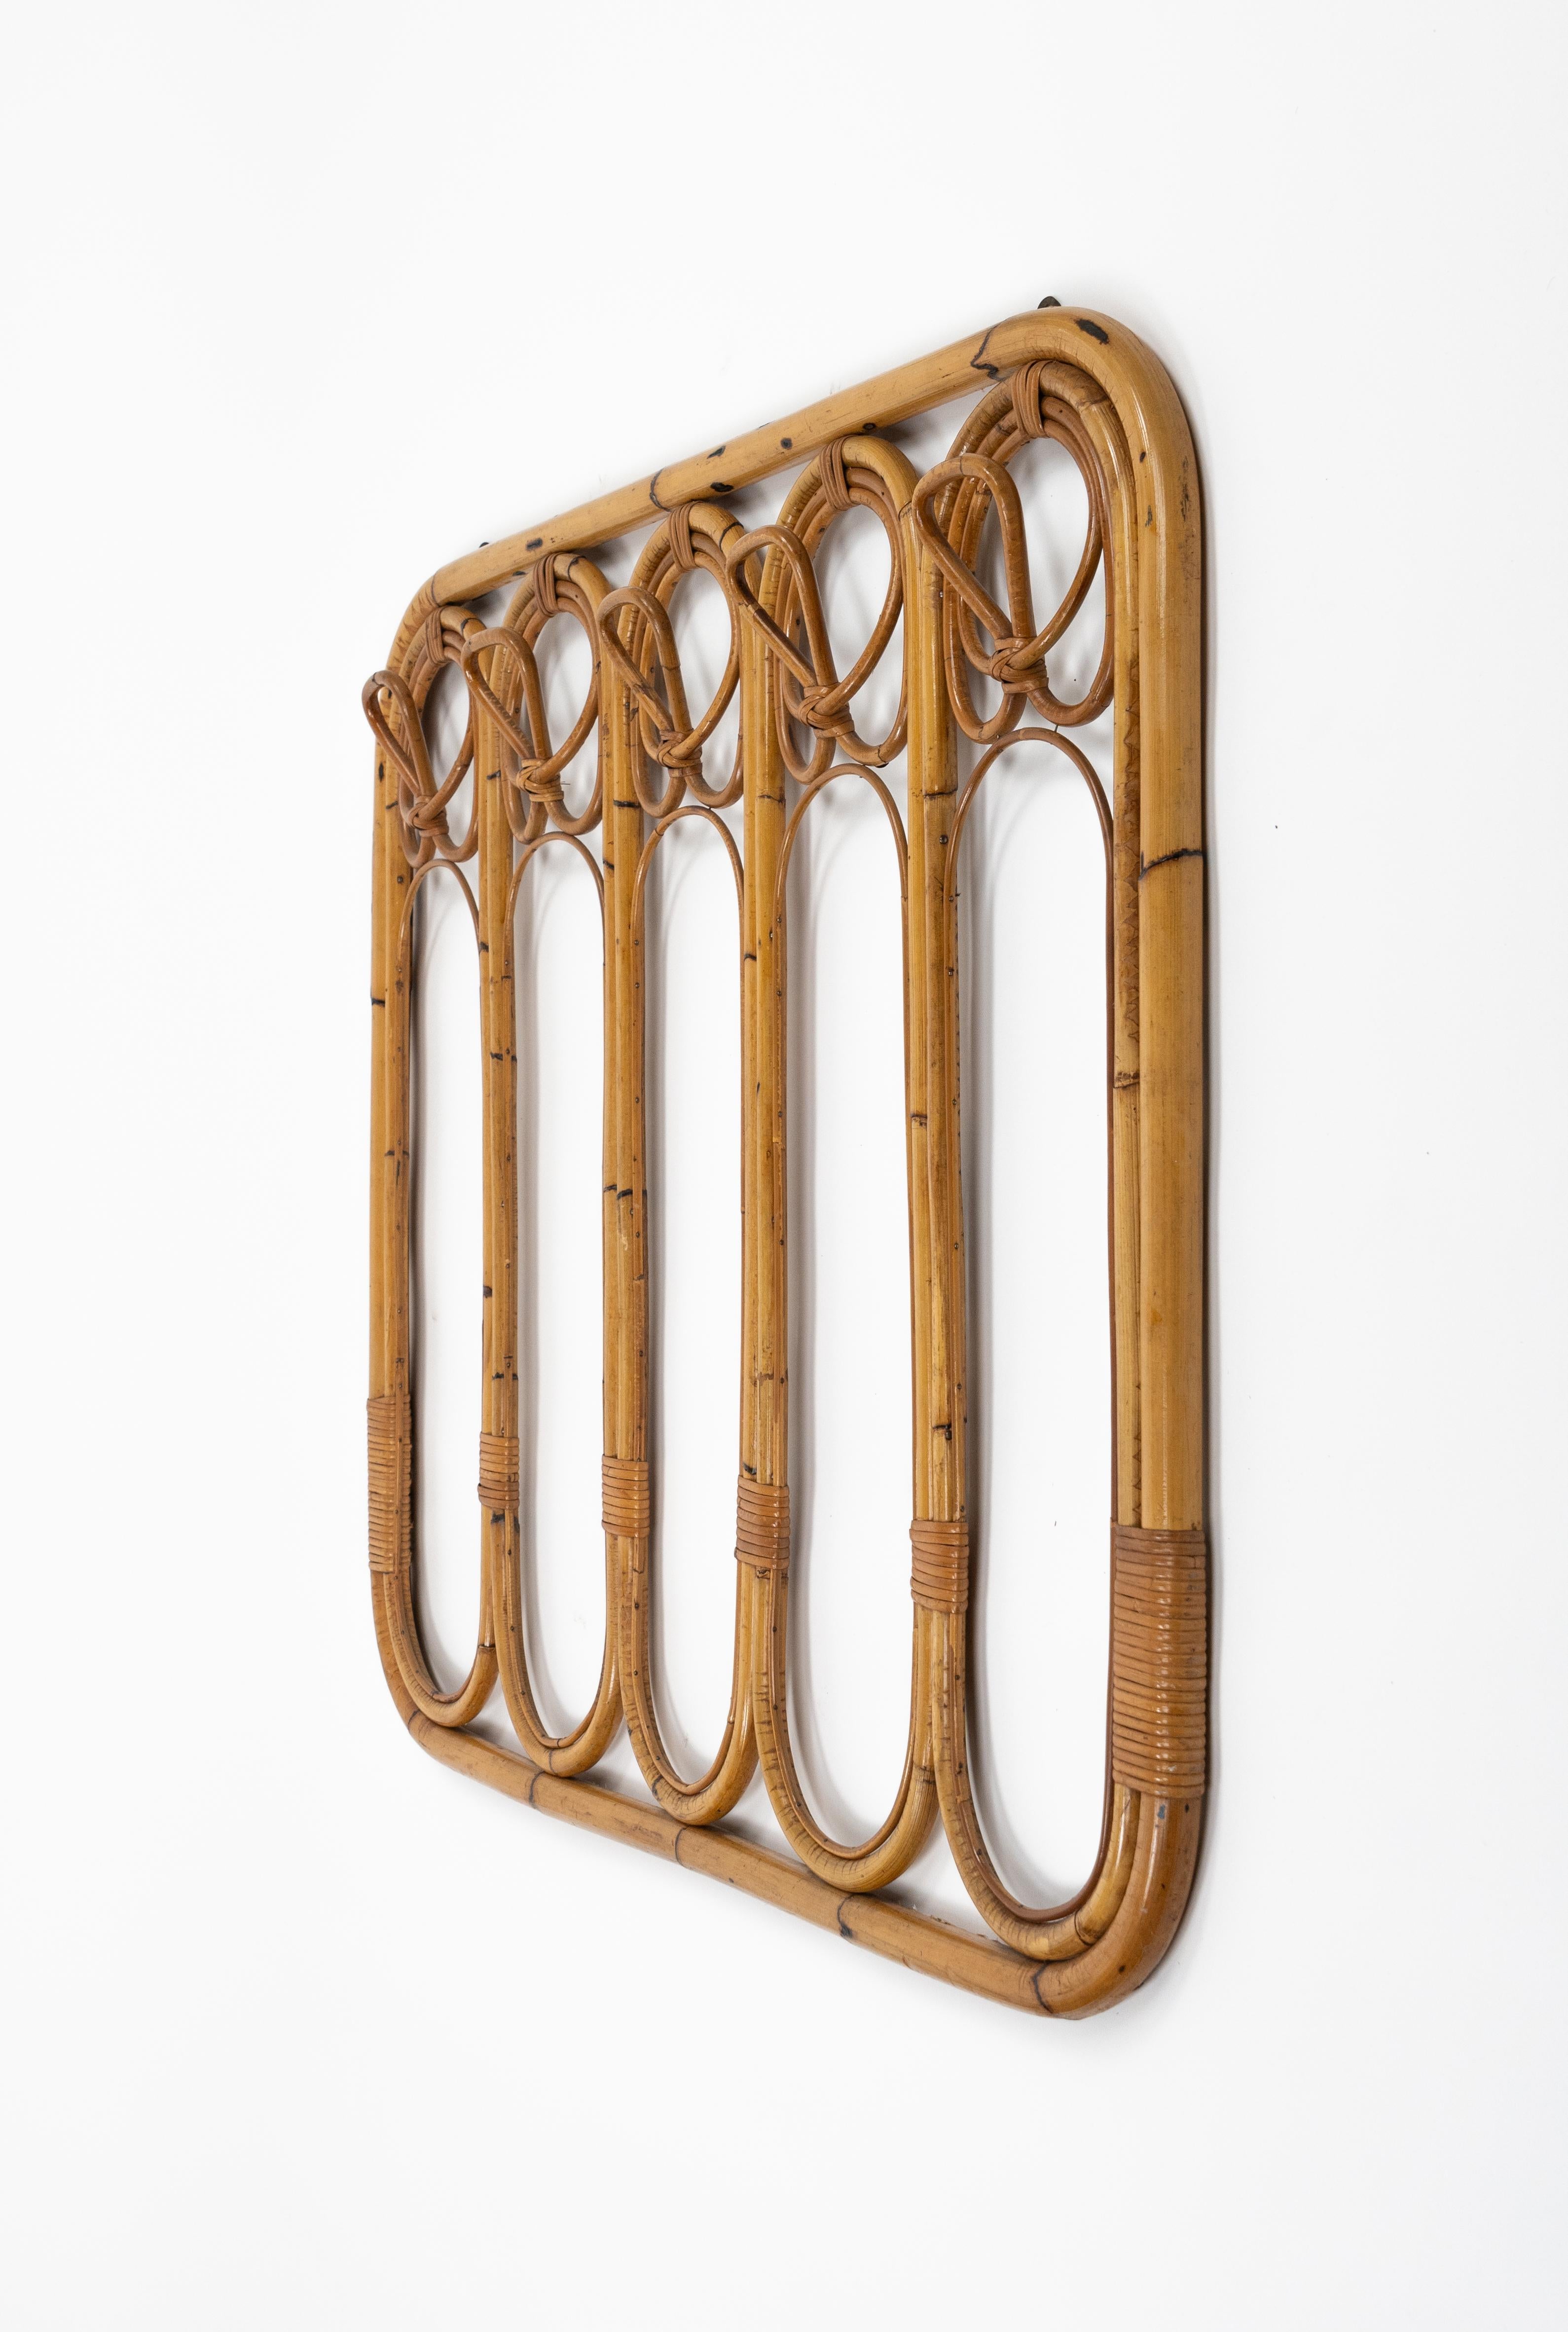 Midcentury Bamboo and Rattan Coat Rack Stand, Italy 1960s For Sale 4